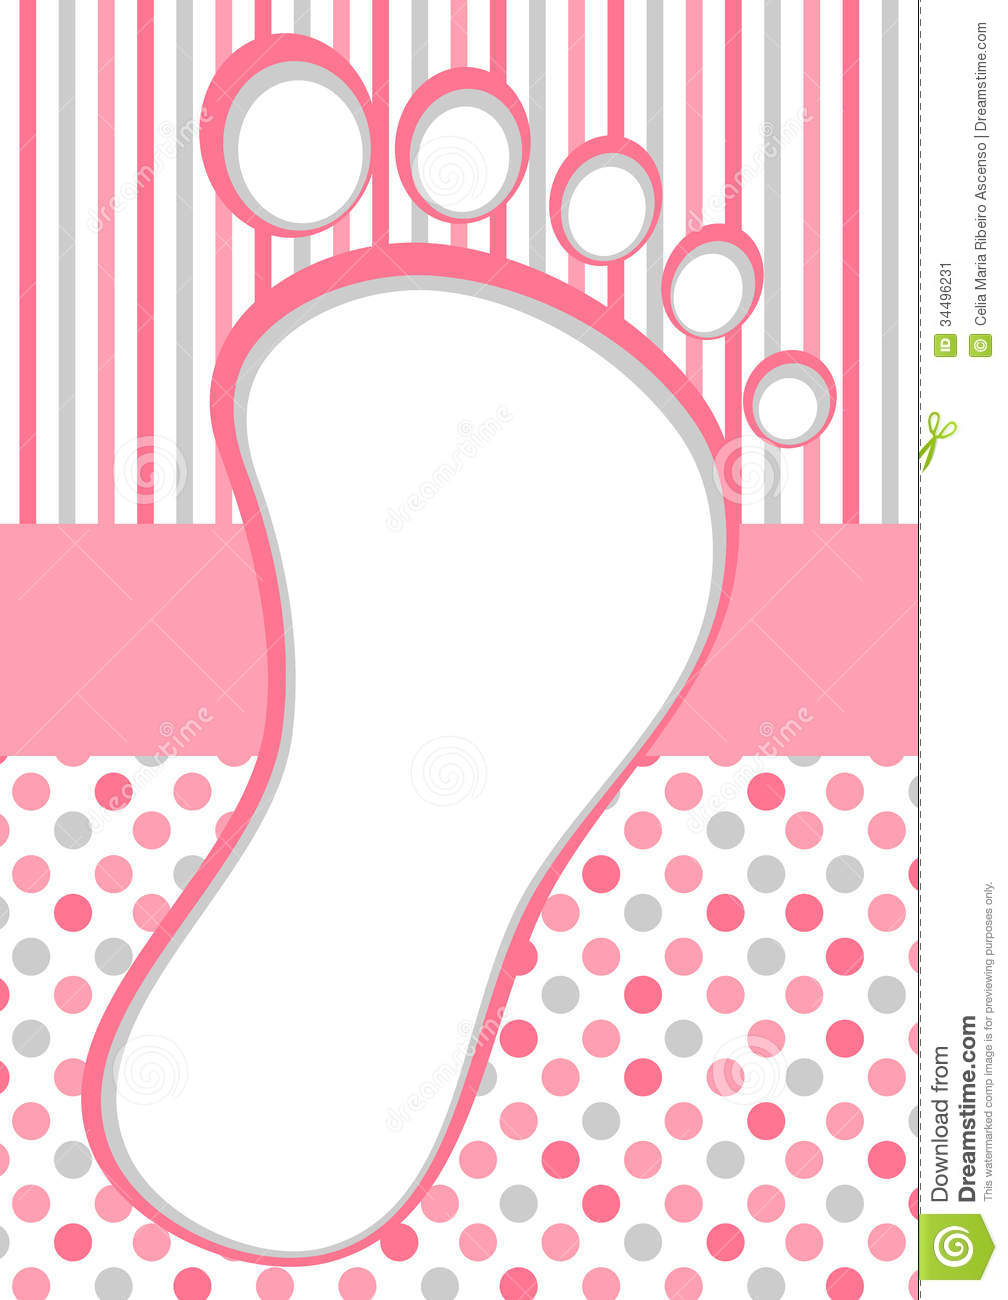 Pink Baby Foot Frame With Polka Dots And Stripes Stock Image   Image